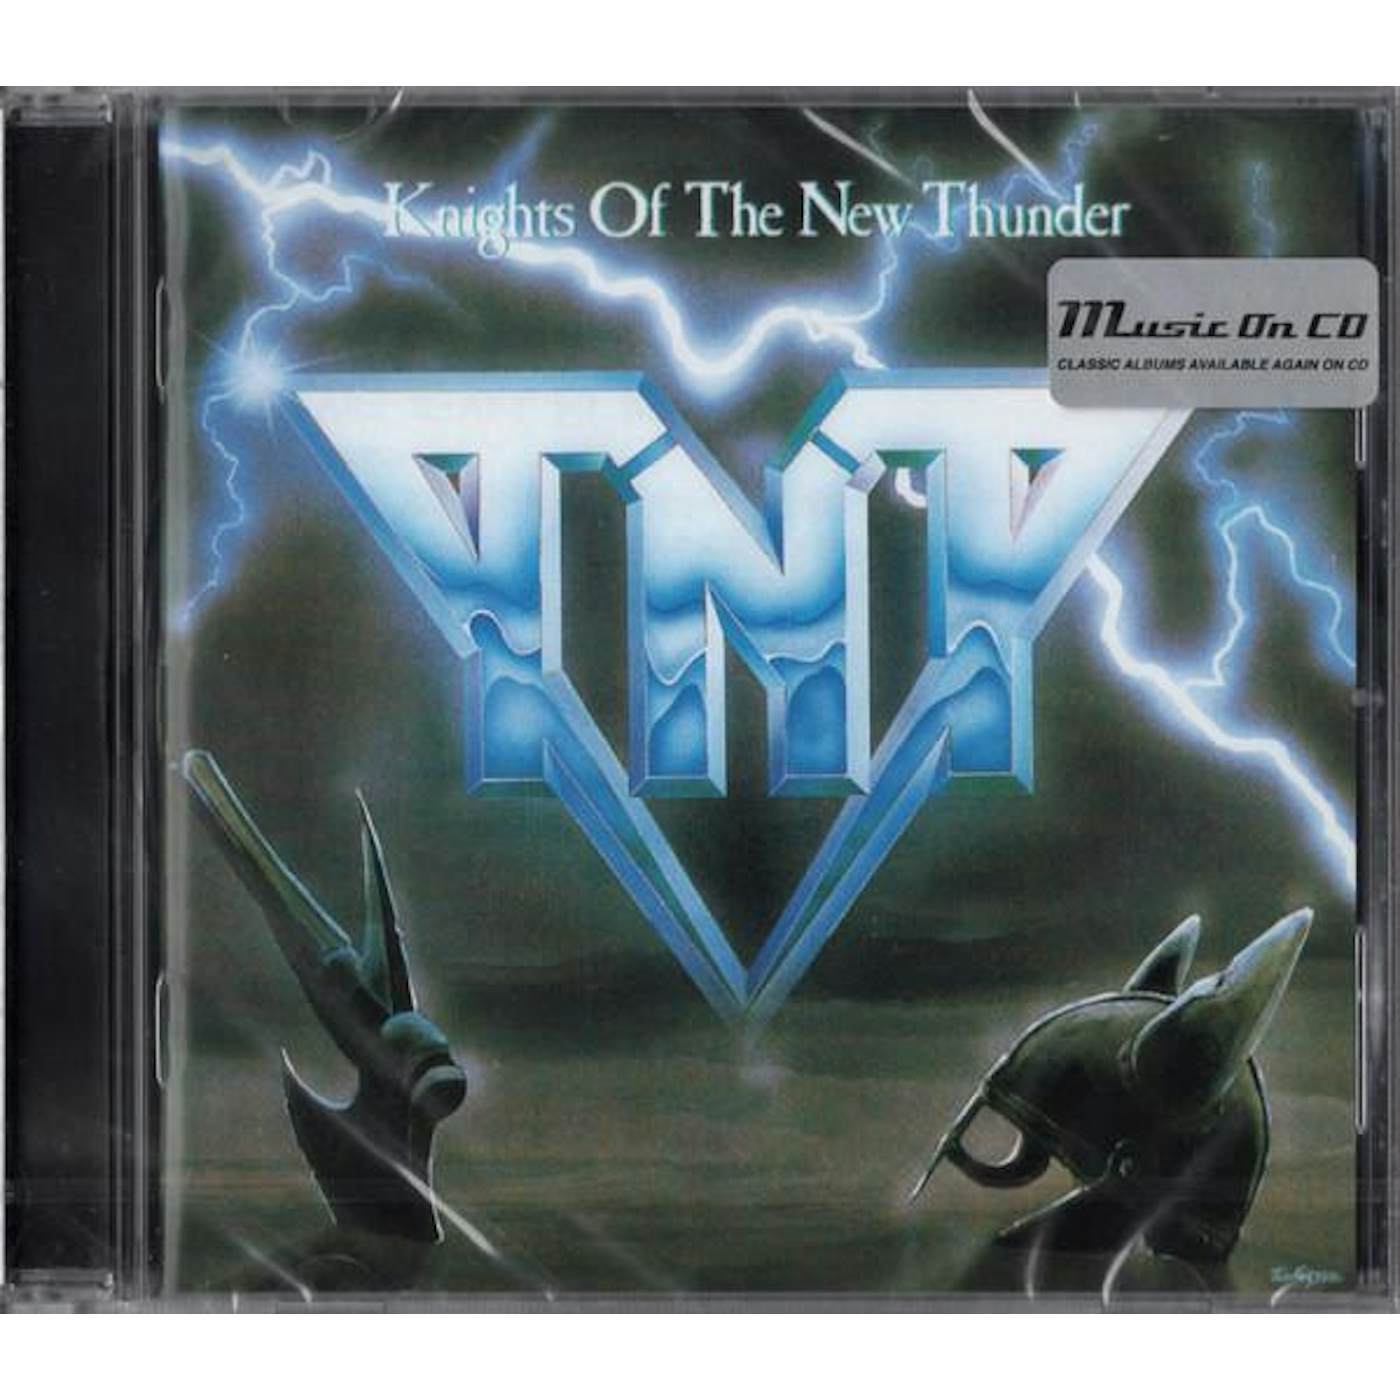 TNT KNIGHTS OF THE NEW THUNDER (24BIT REMASTERED) CD